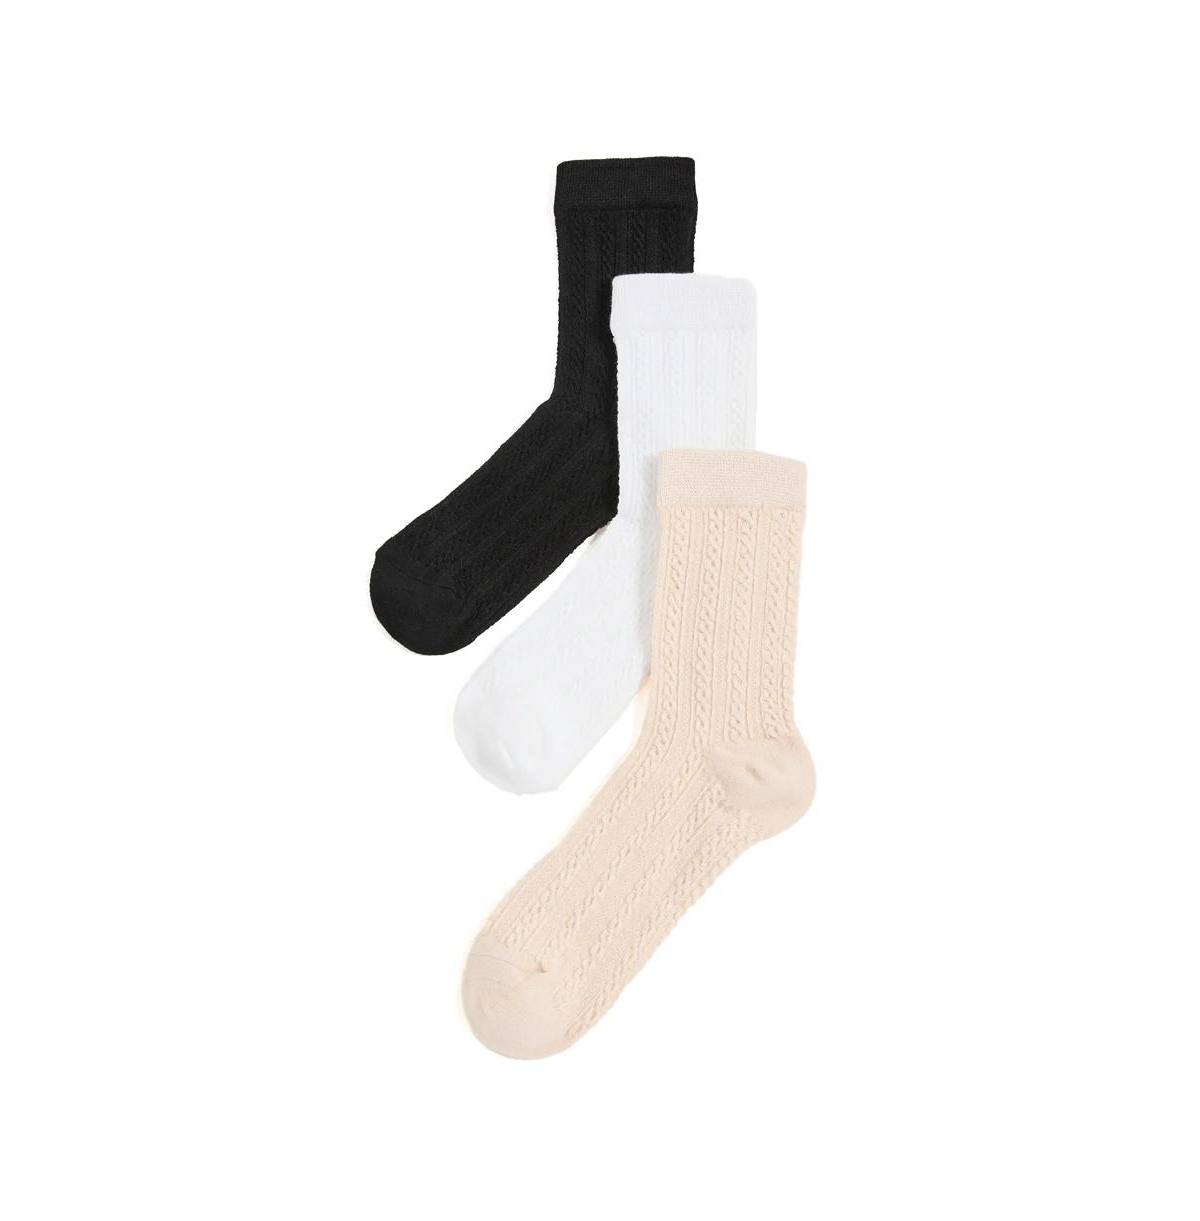 Gift Set of Three Cable Knit Socks - Ivory/black/oat